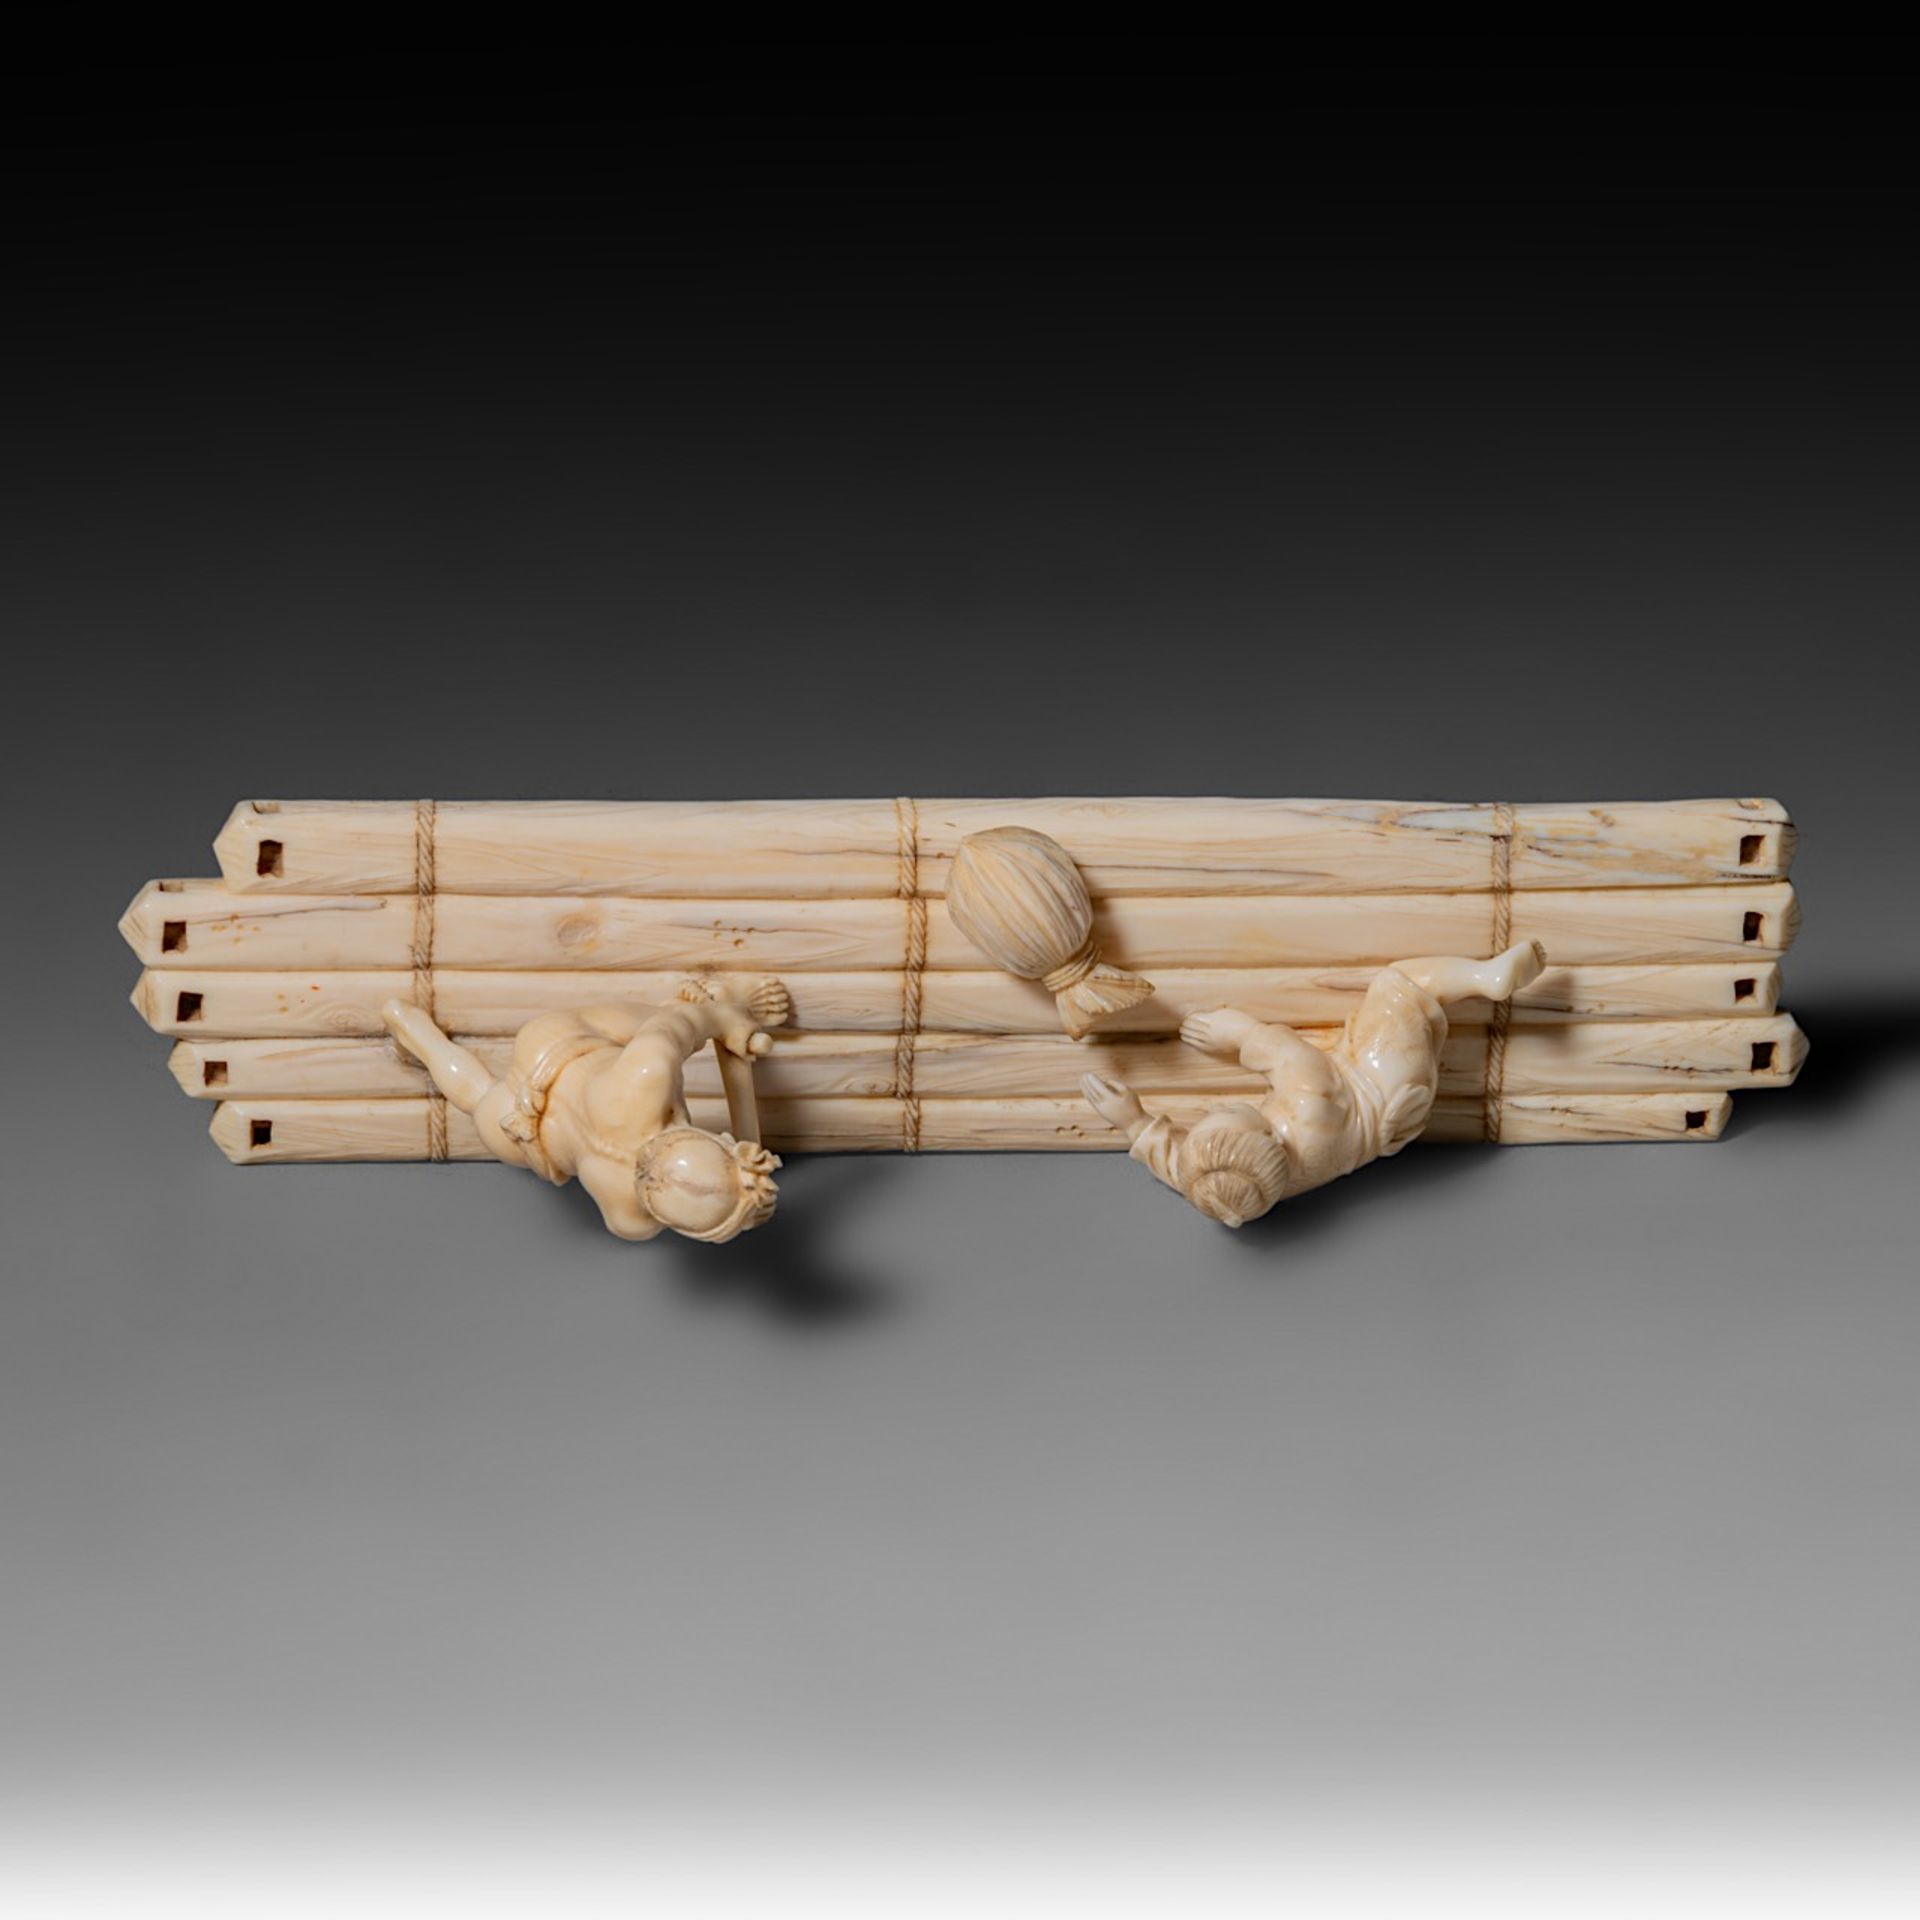 Two Japanese Meiji-period (1868-1912) ivory okimono; one depicts a man rowing a raft while a child s - Image 10 of 19